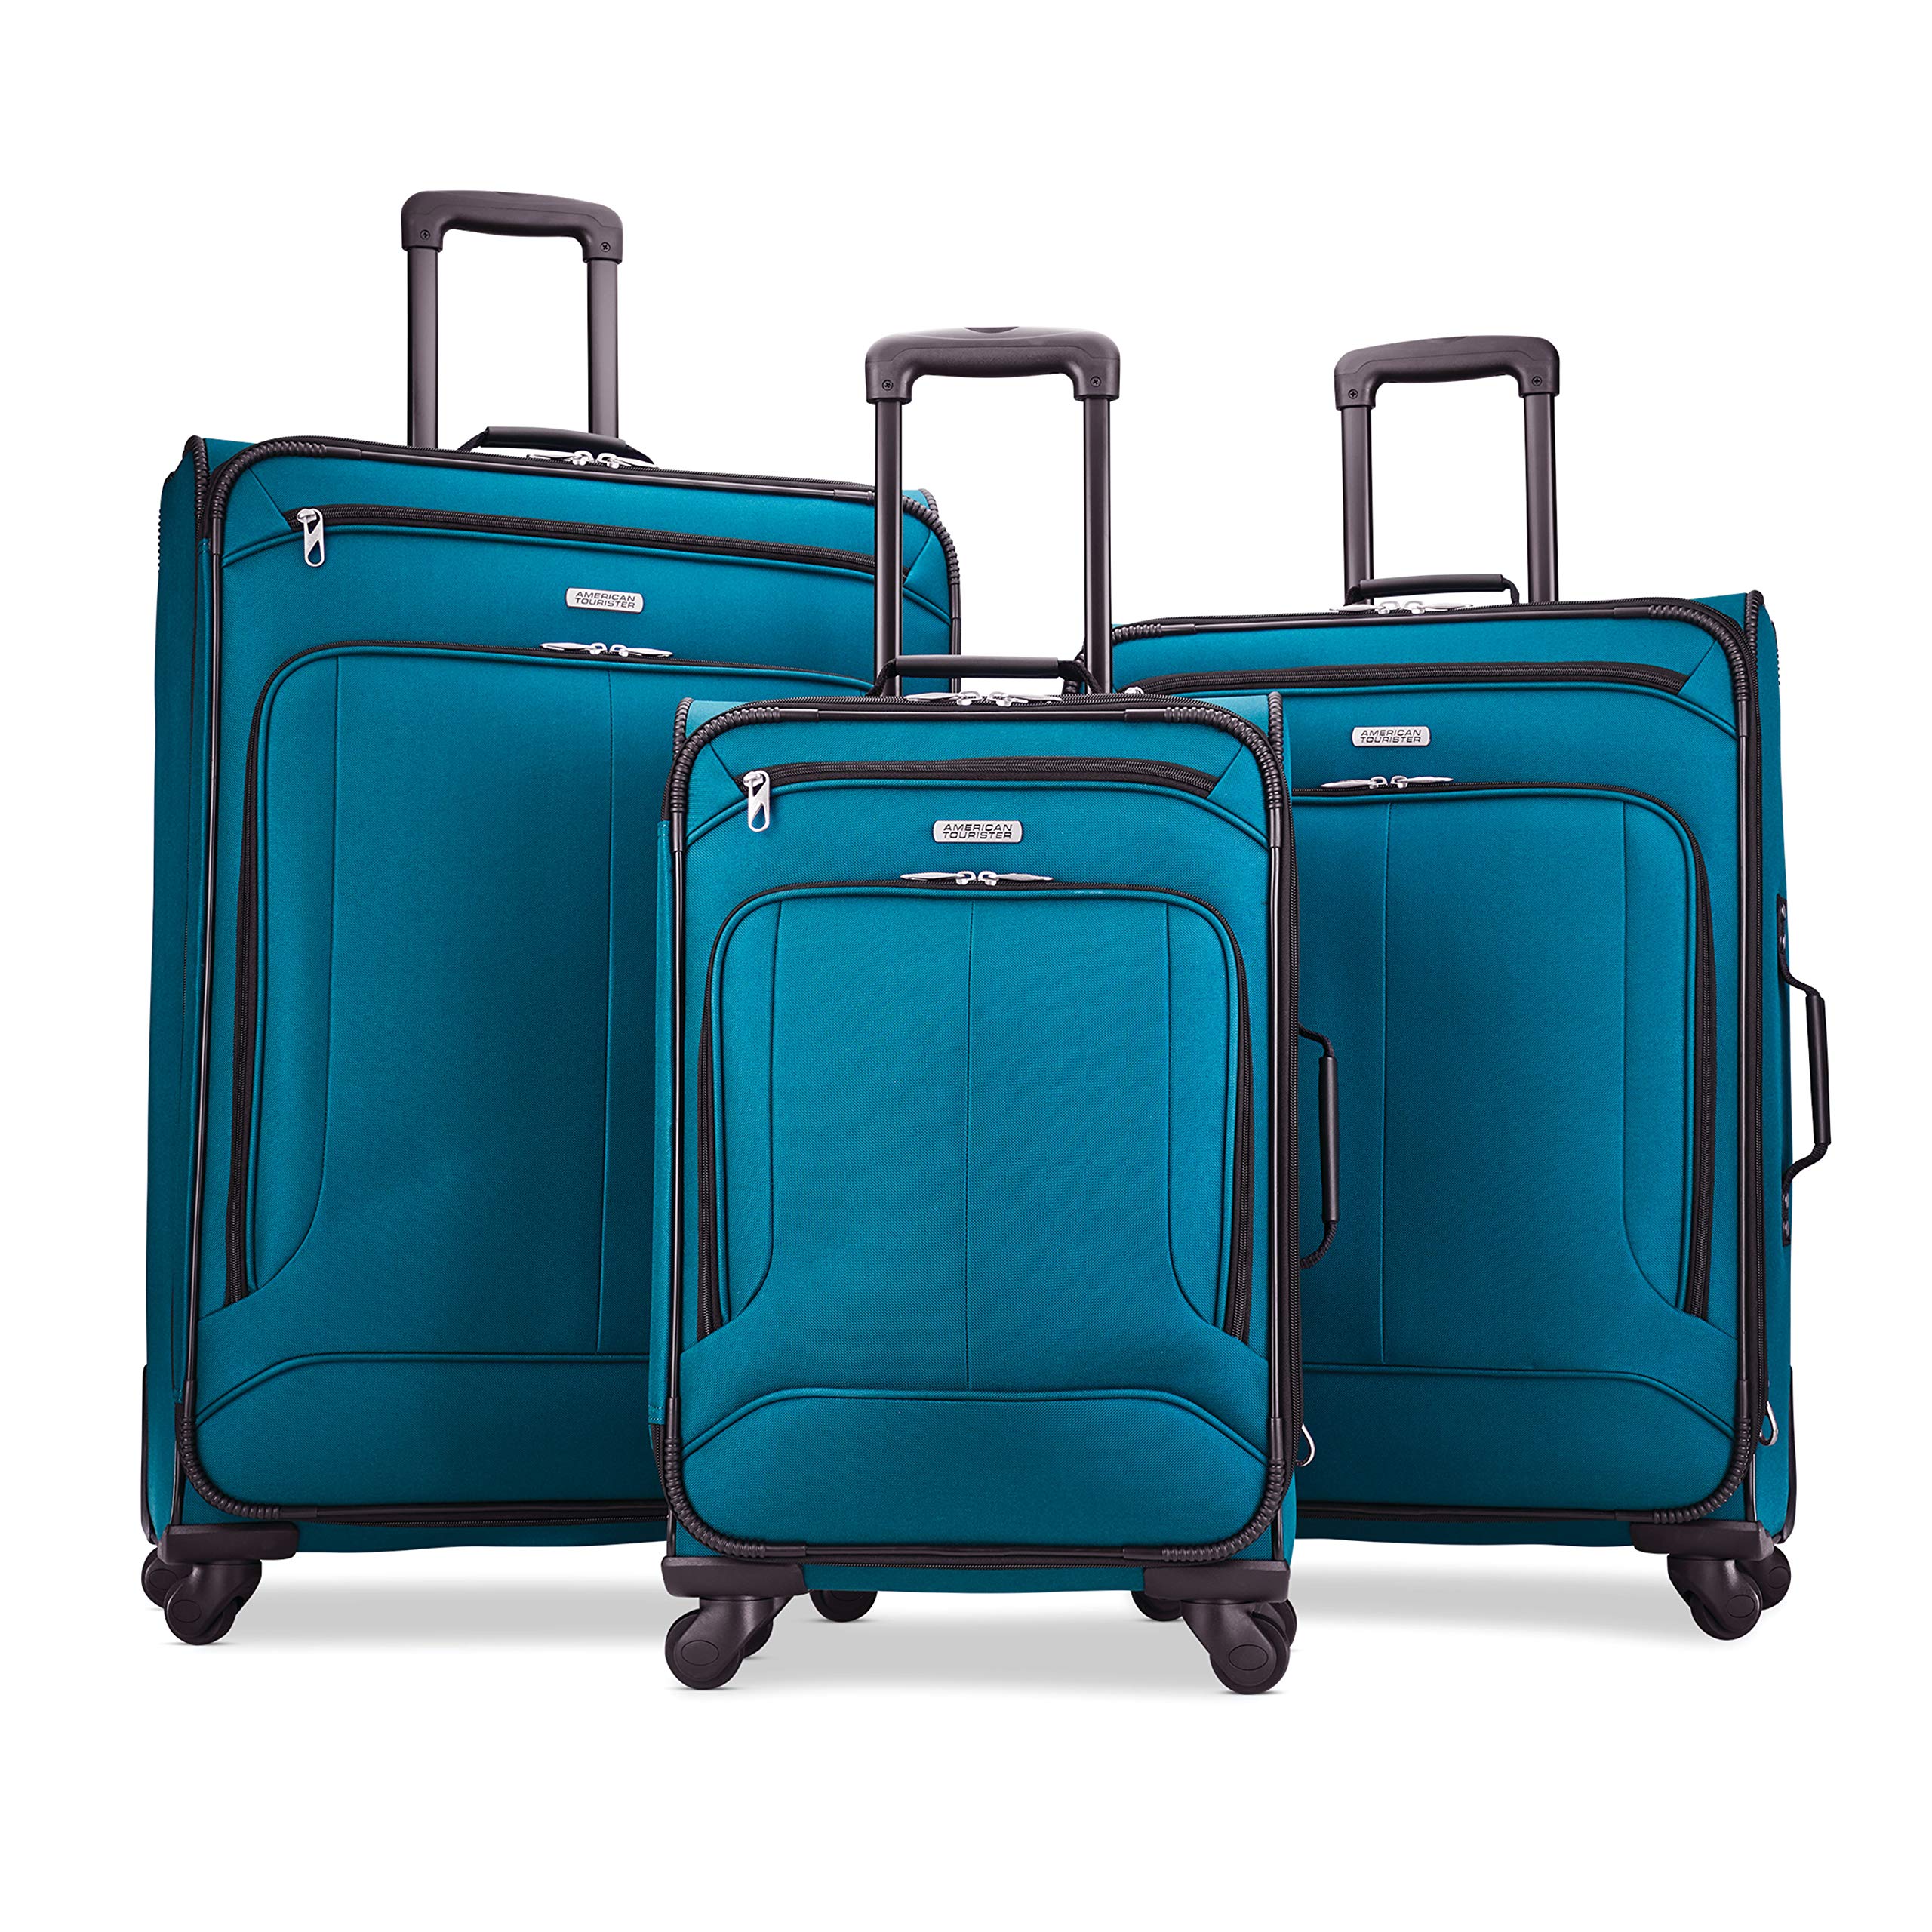 $135.60: 3-Piece American Tourister Pop Max Softside Spinner Luggage (21" / 25" / 29")